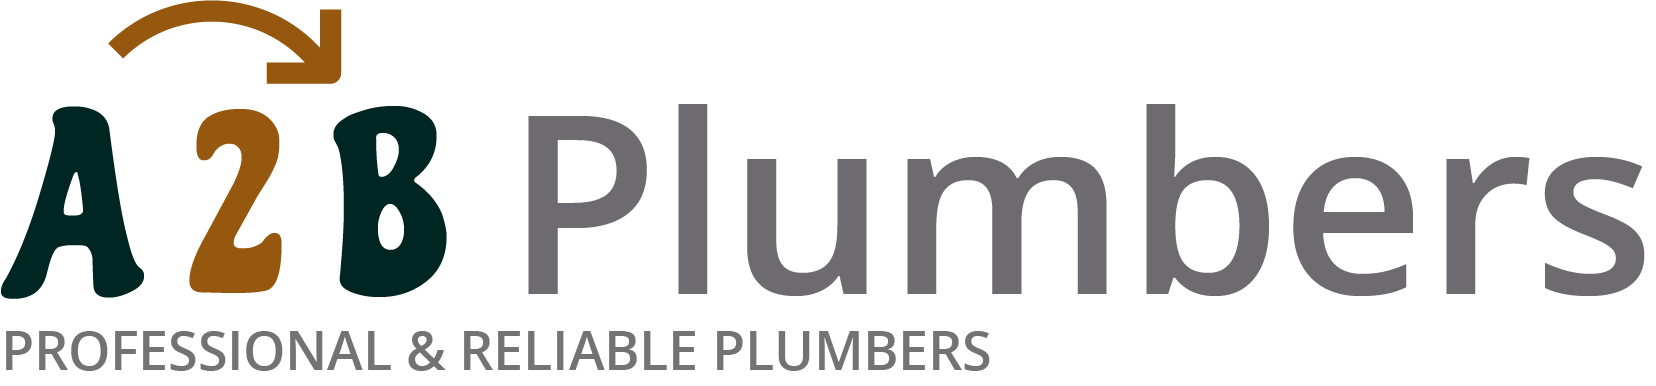 If you need a boiler installed, a radiator repaired or a leaking tap fixed, call us now - we provide services for properties in Golborne and the local area.